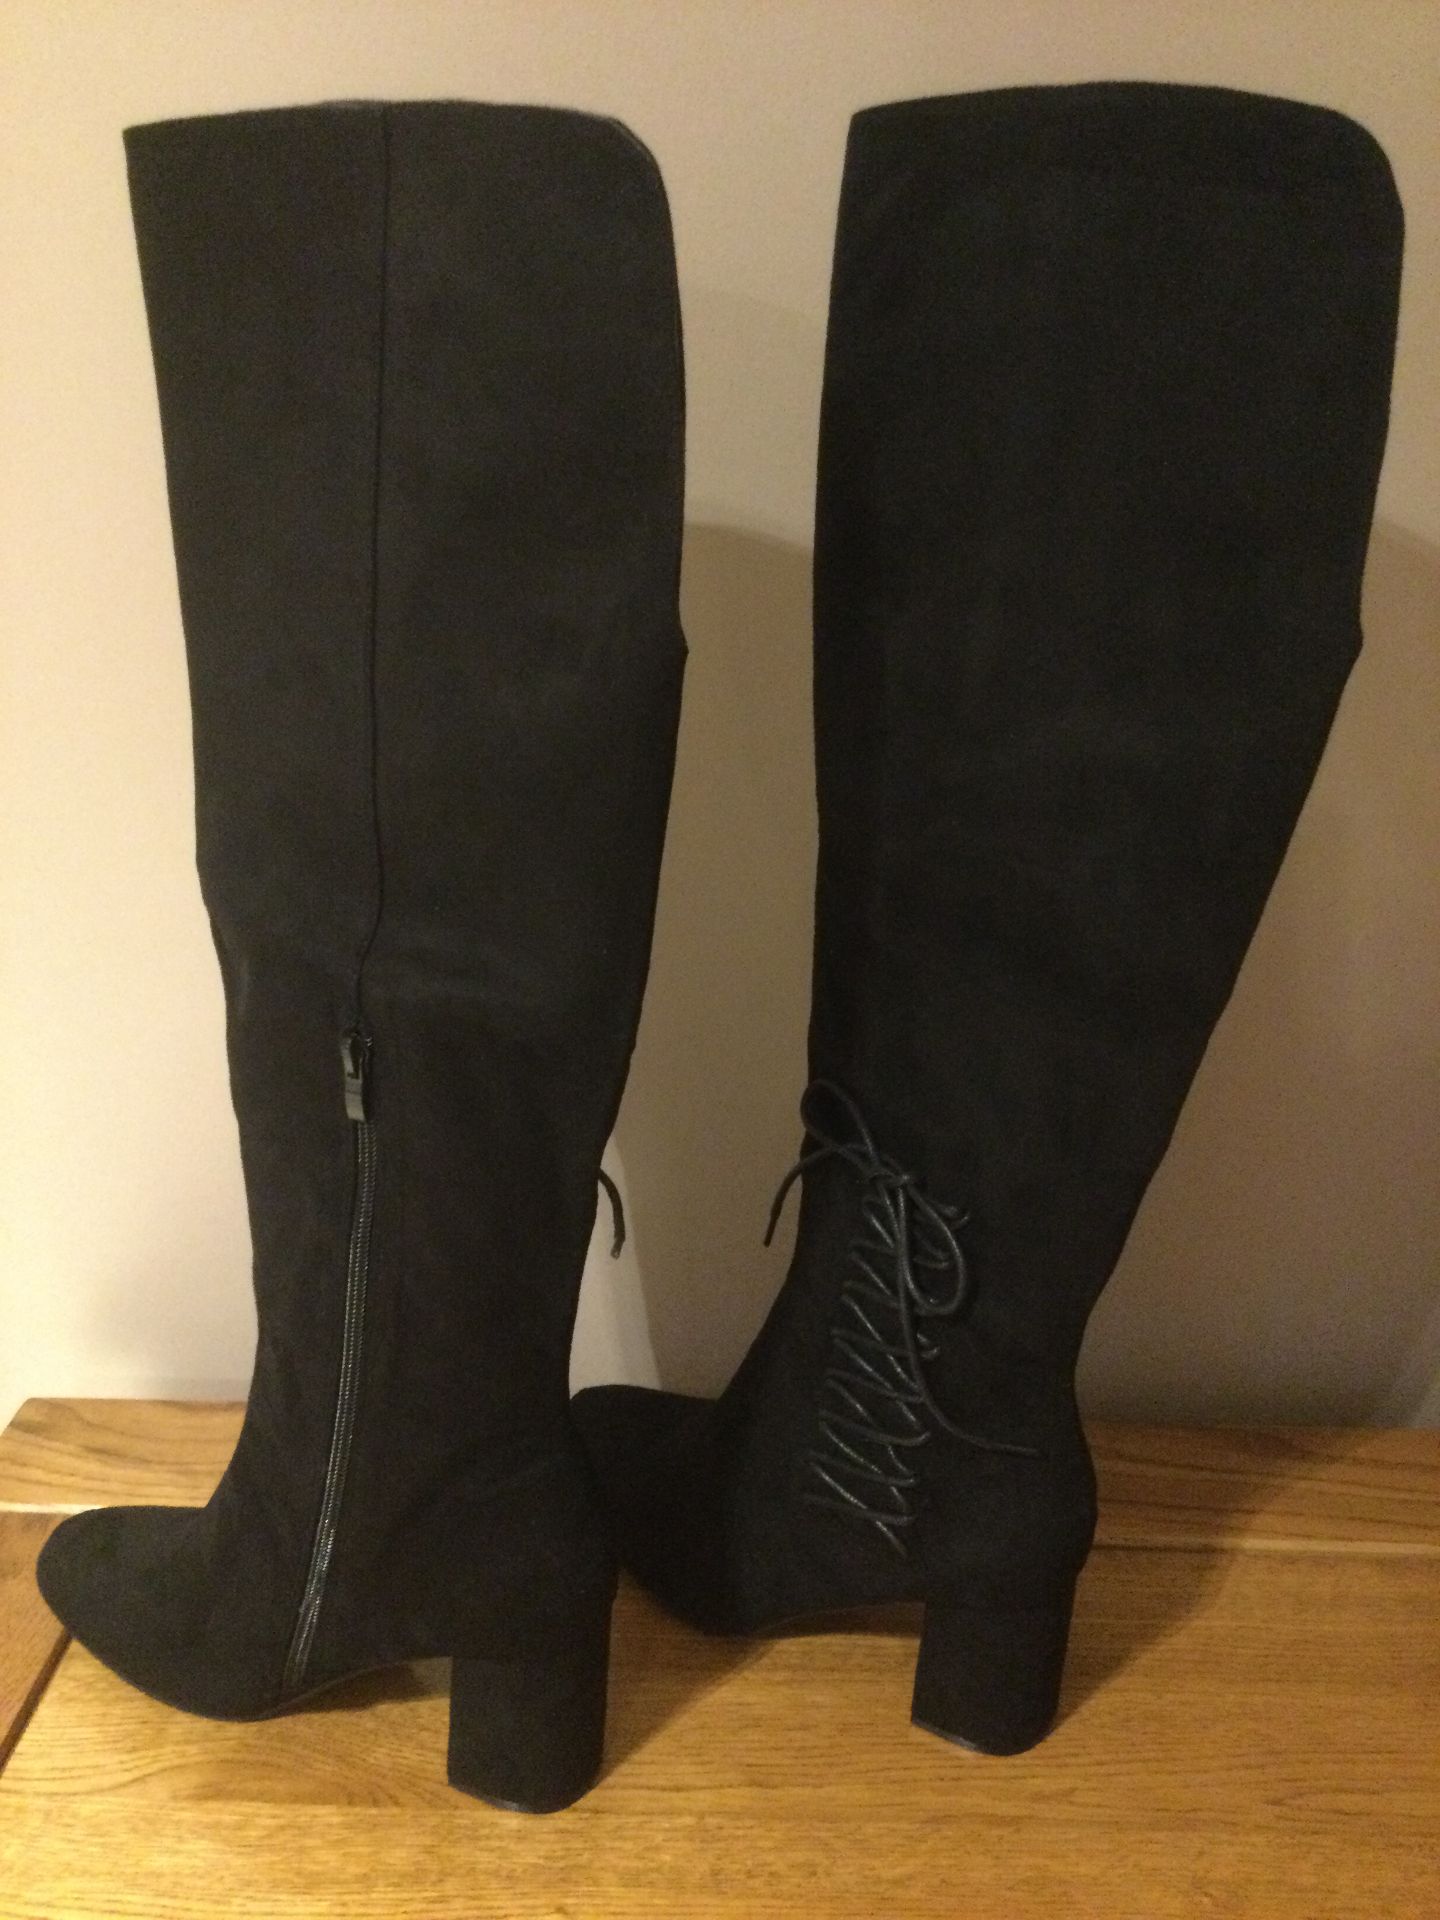 Dolcis “Emma” Long Boots, Block Heel, Size 4, Black - New RRP £55.00 - Image 2 of 7